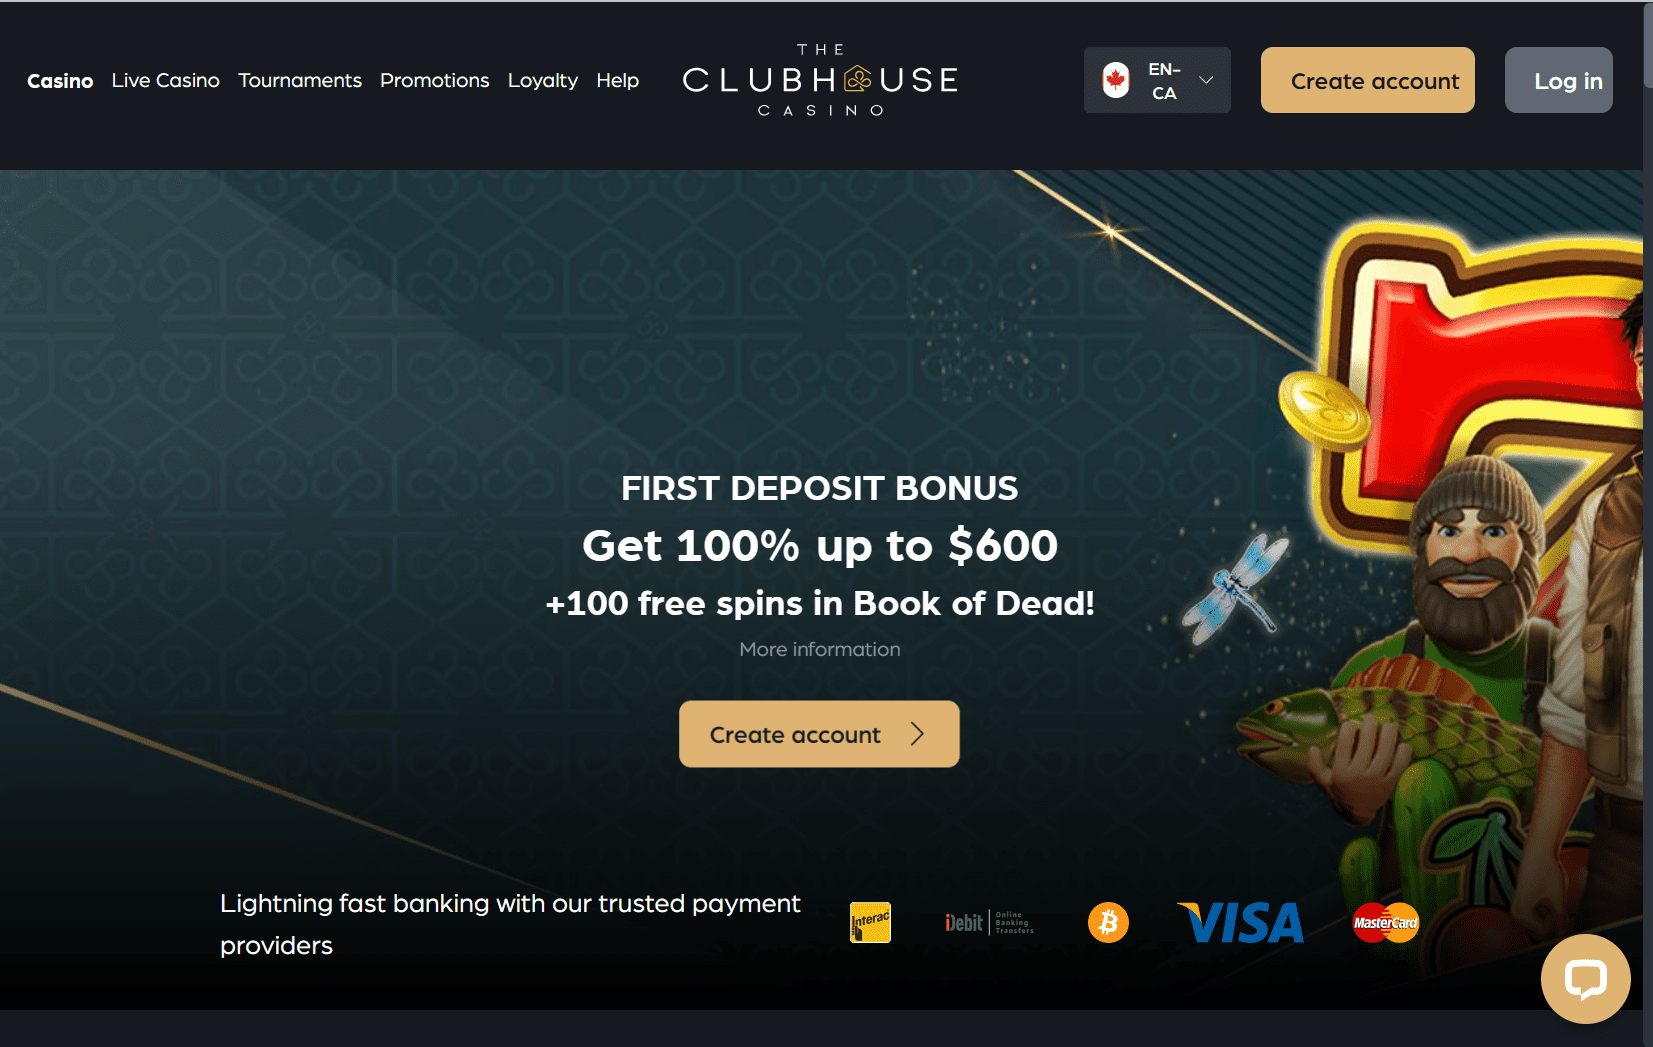 Screenshot of The ClubHouse Casino's landing page